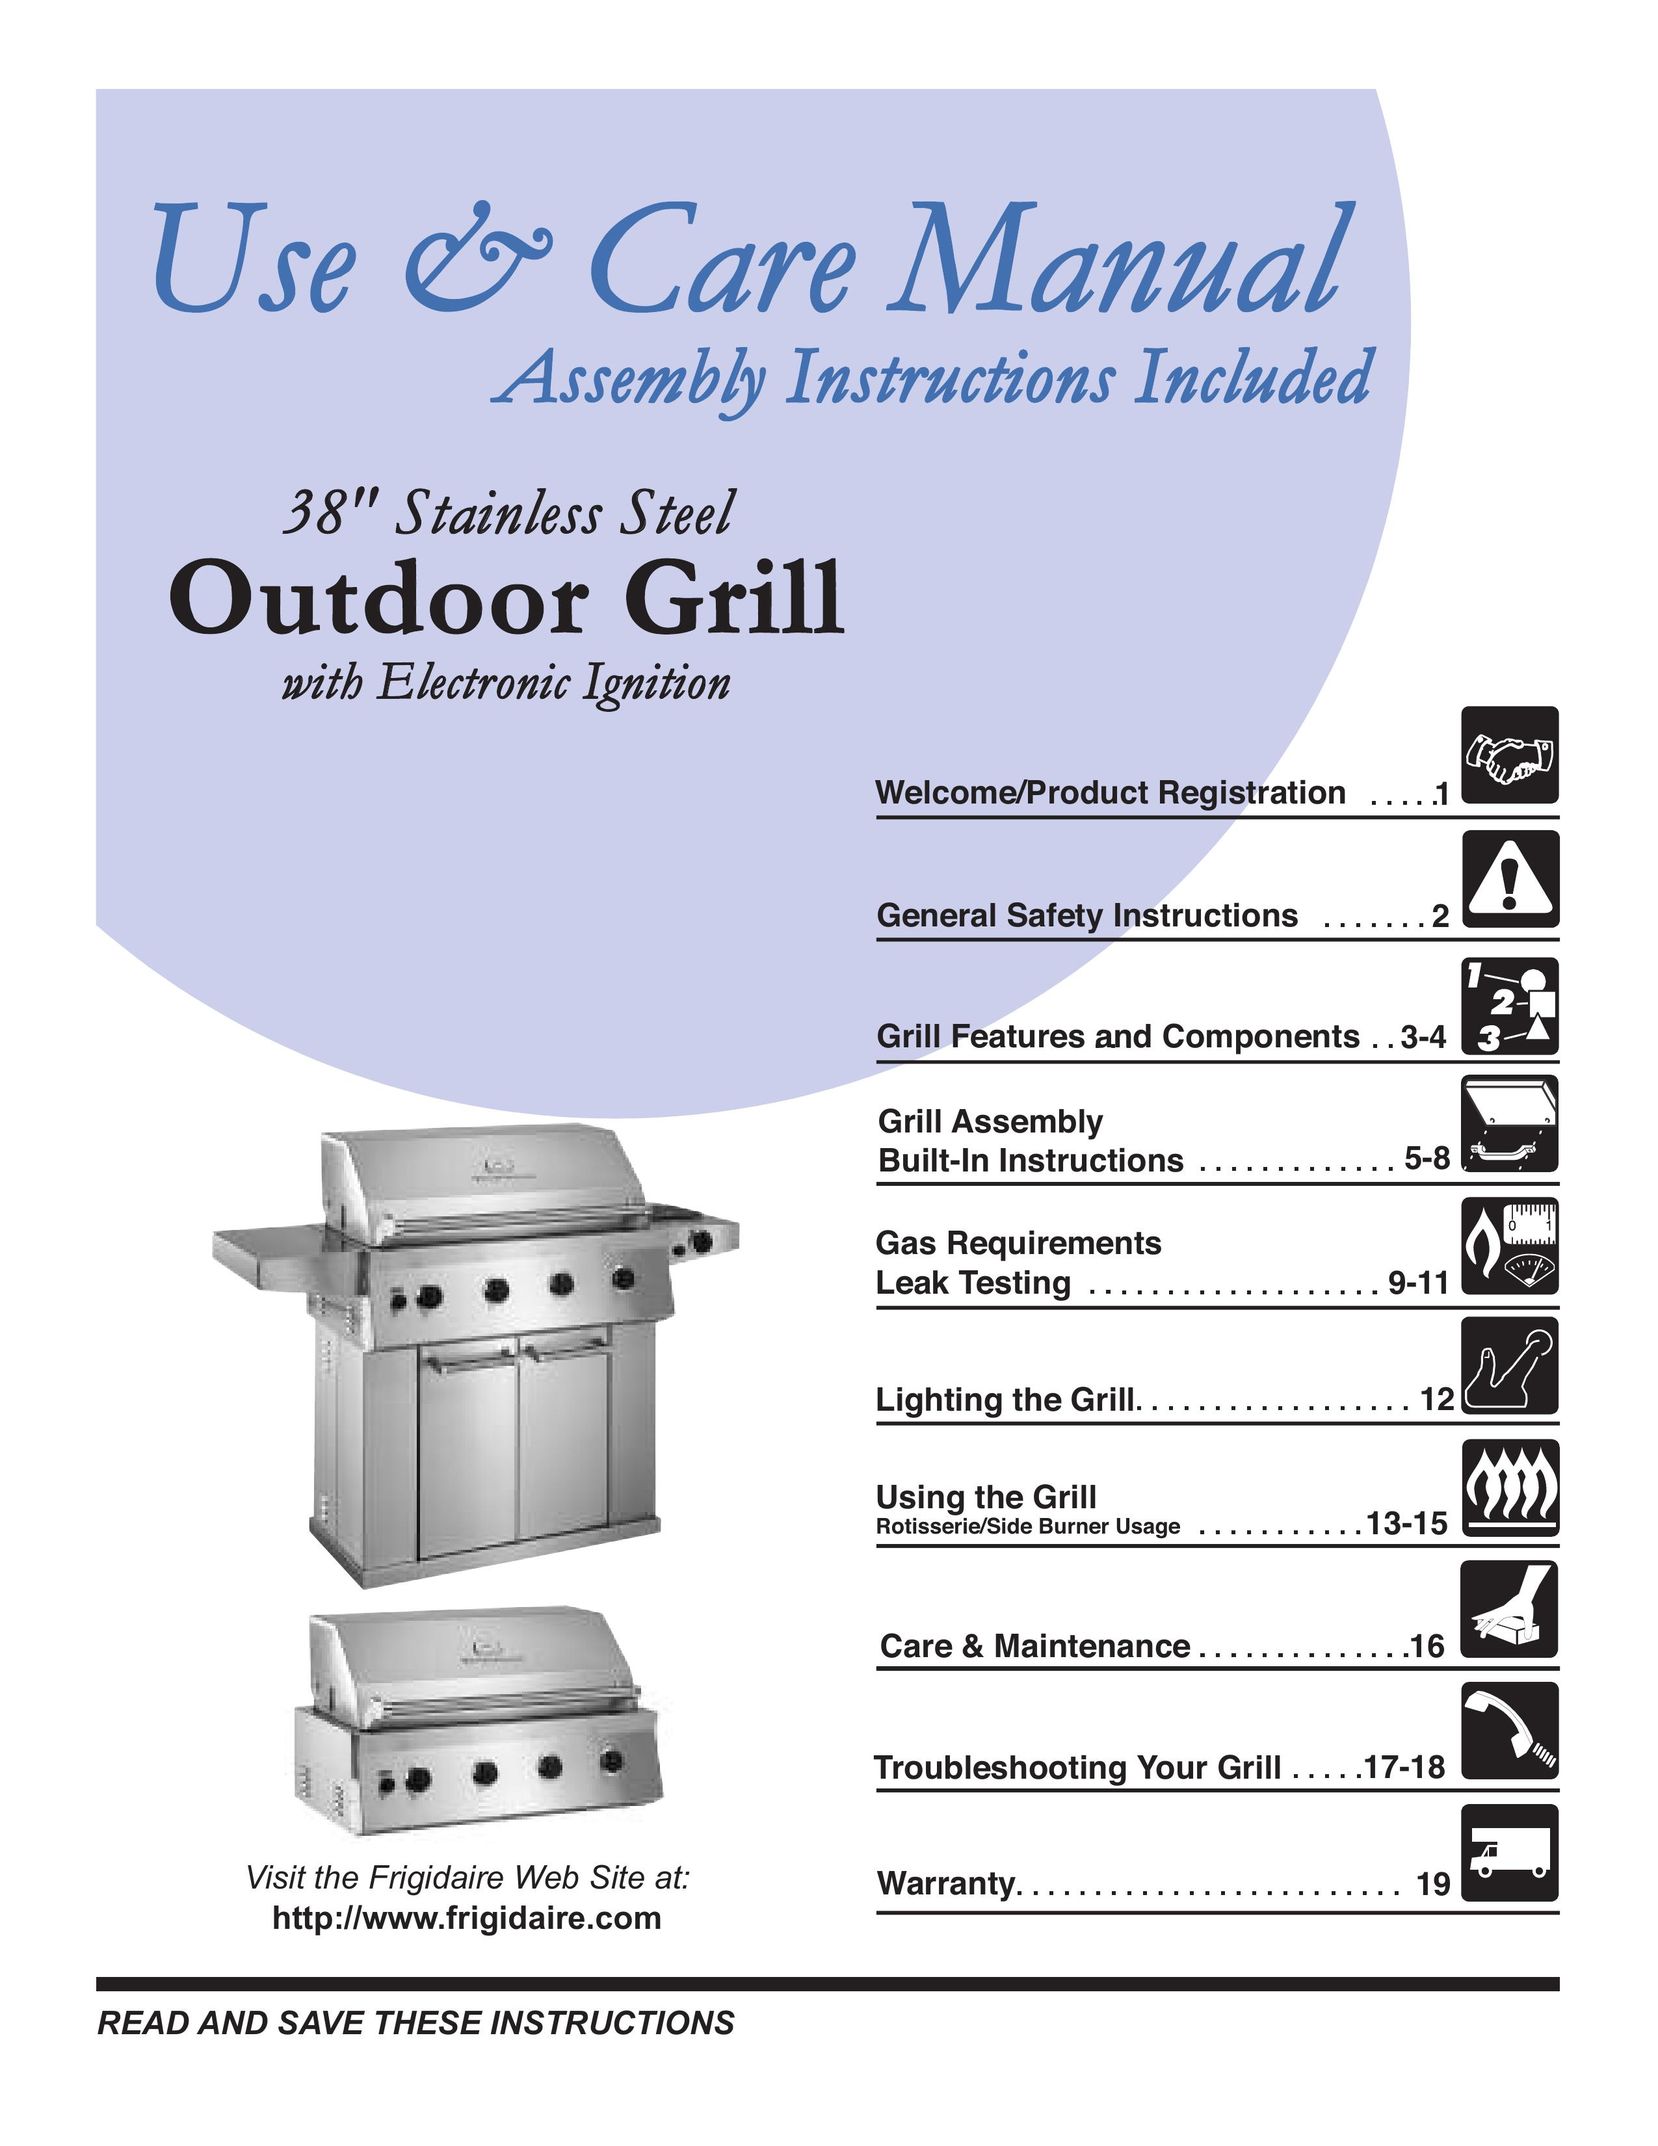 Frigidaire Outdoor Grill with Electronic Ignition Kitchen Grill User Manual